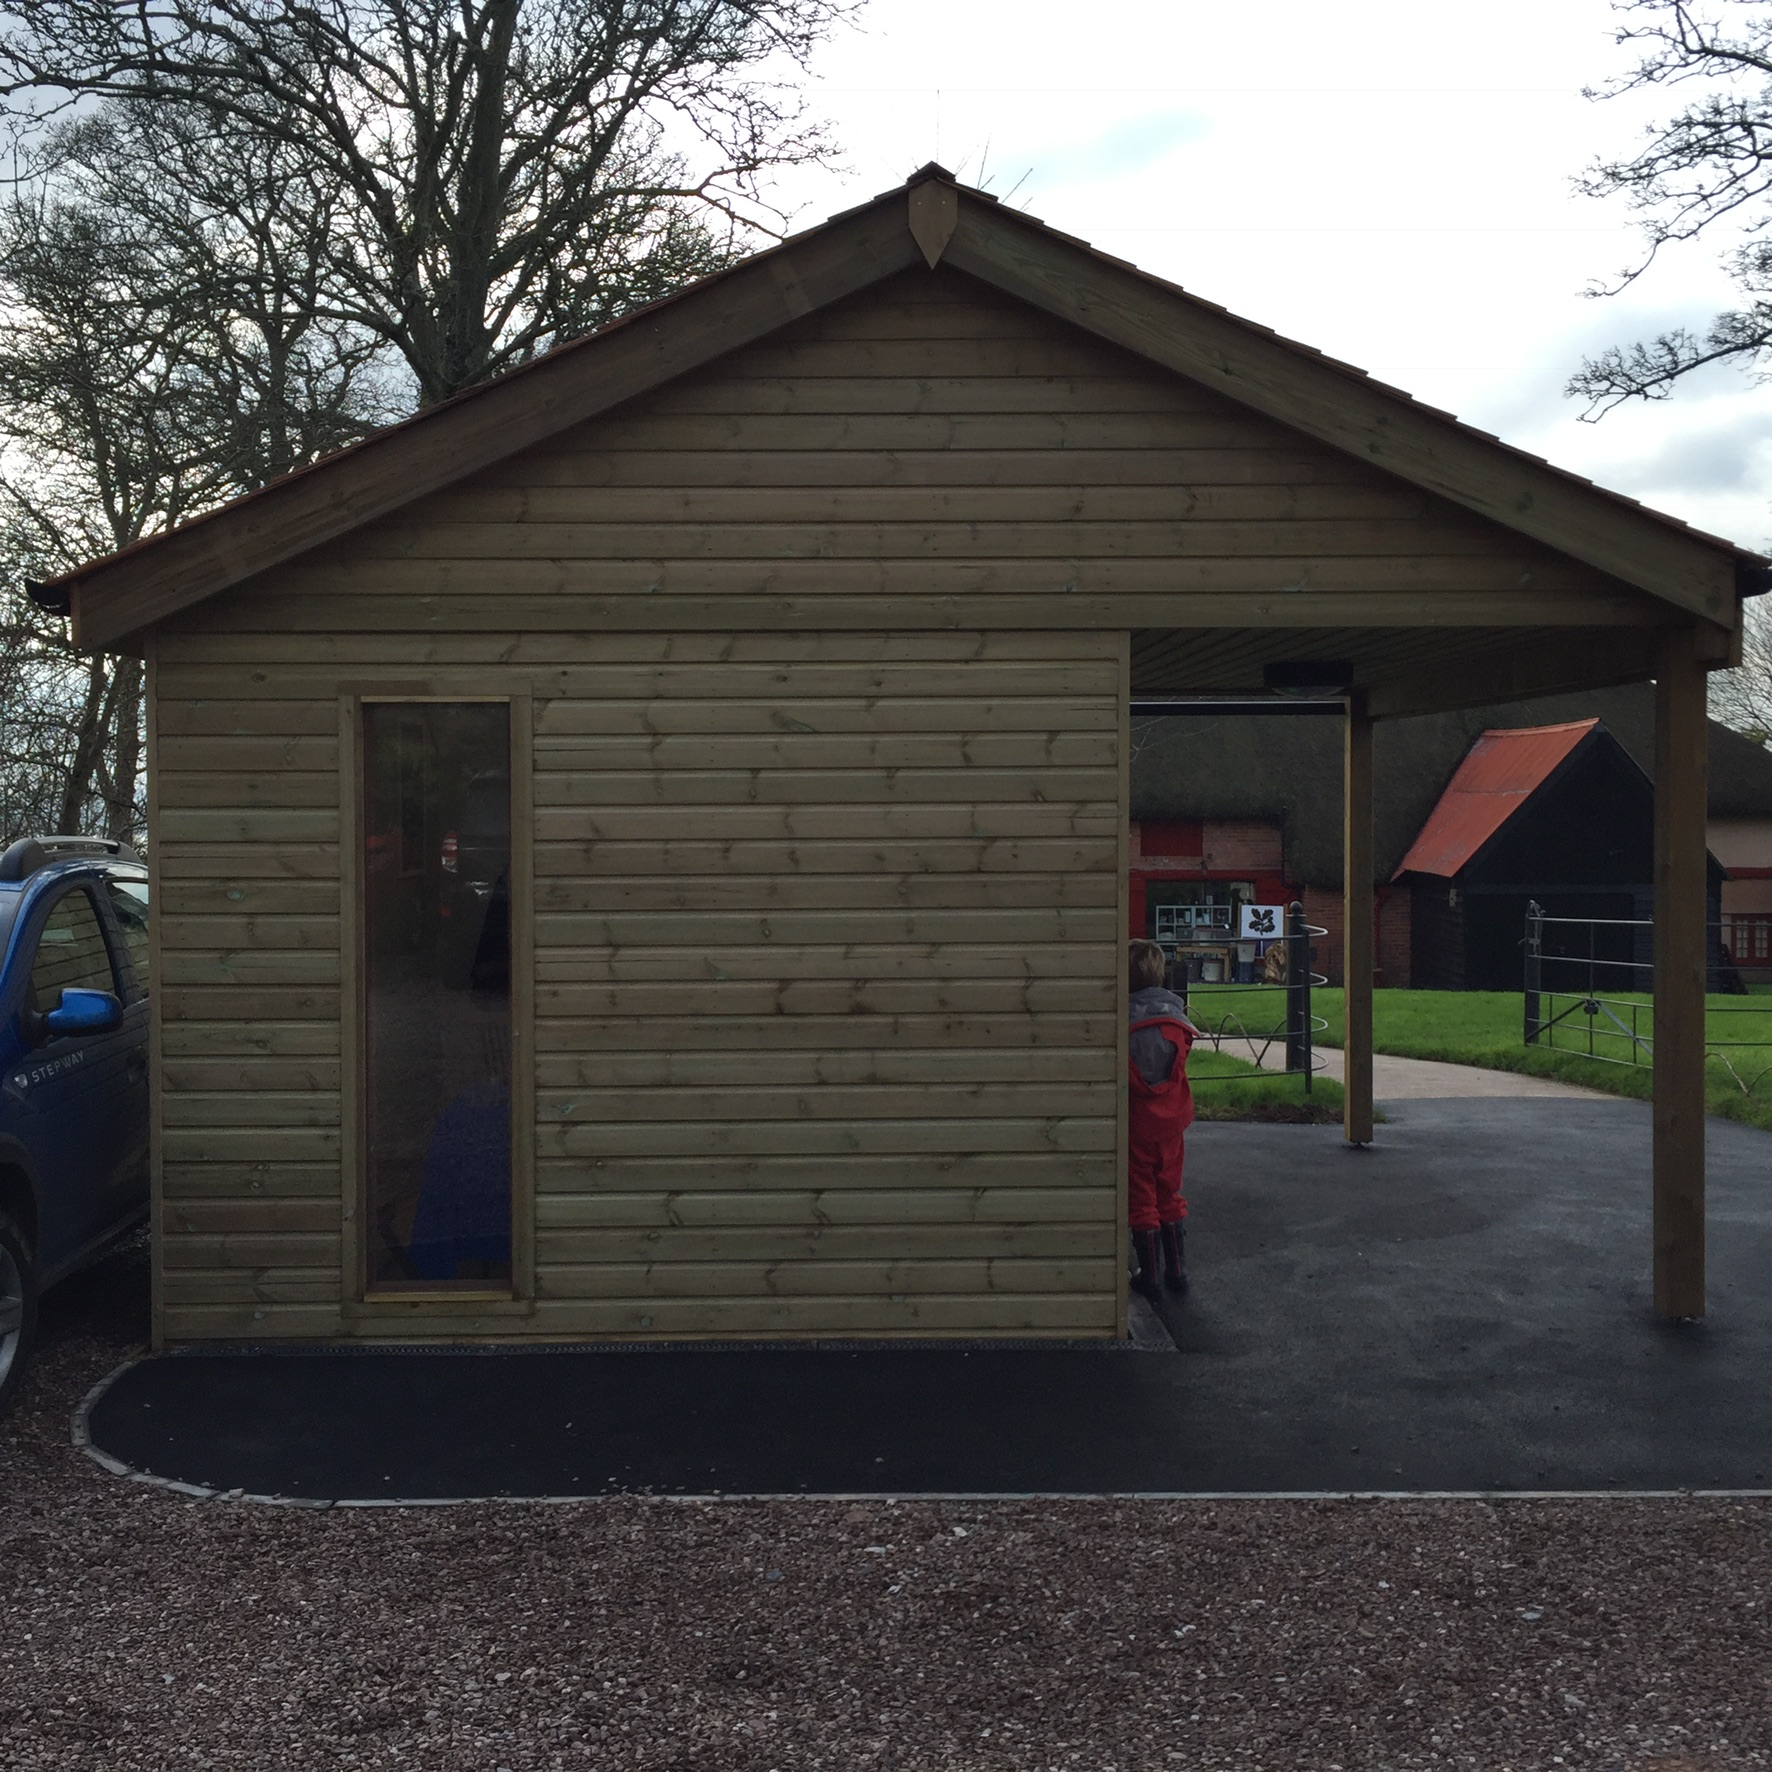 Stunning oak framed office, with folding double glazed doors, complete with a Cedar Shingle roof - Harris Timber Products